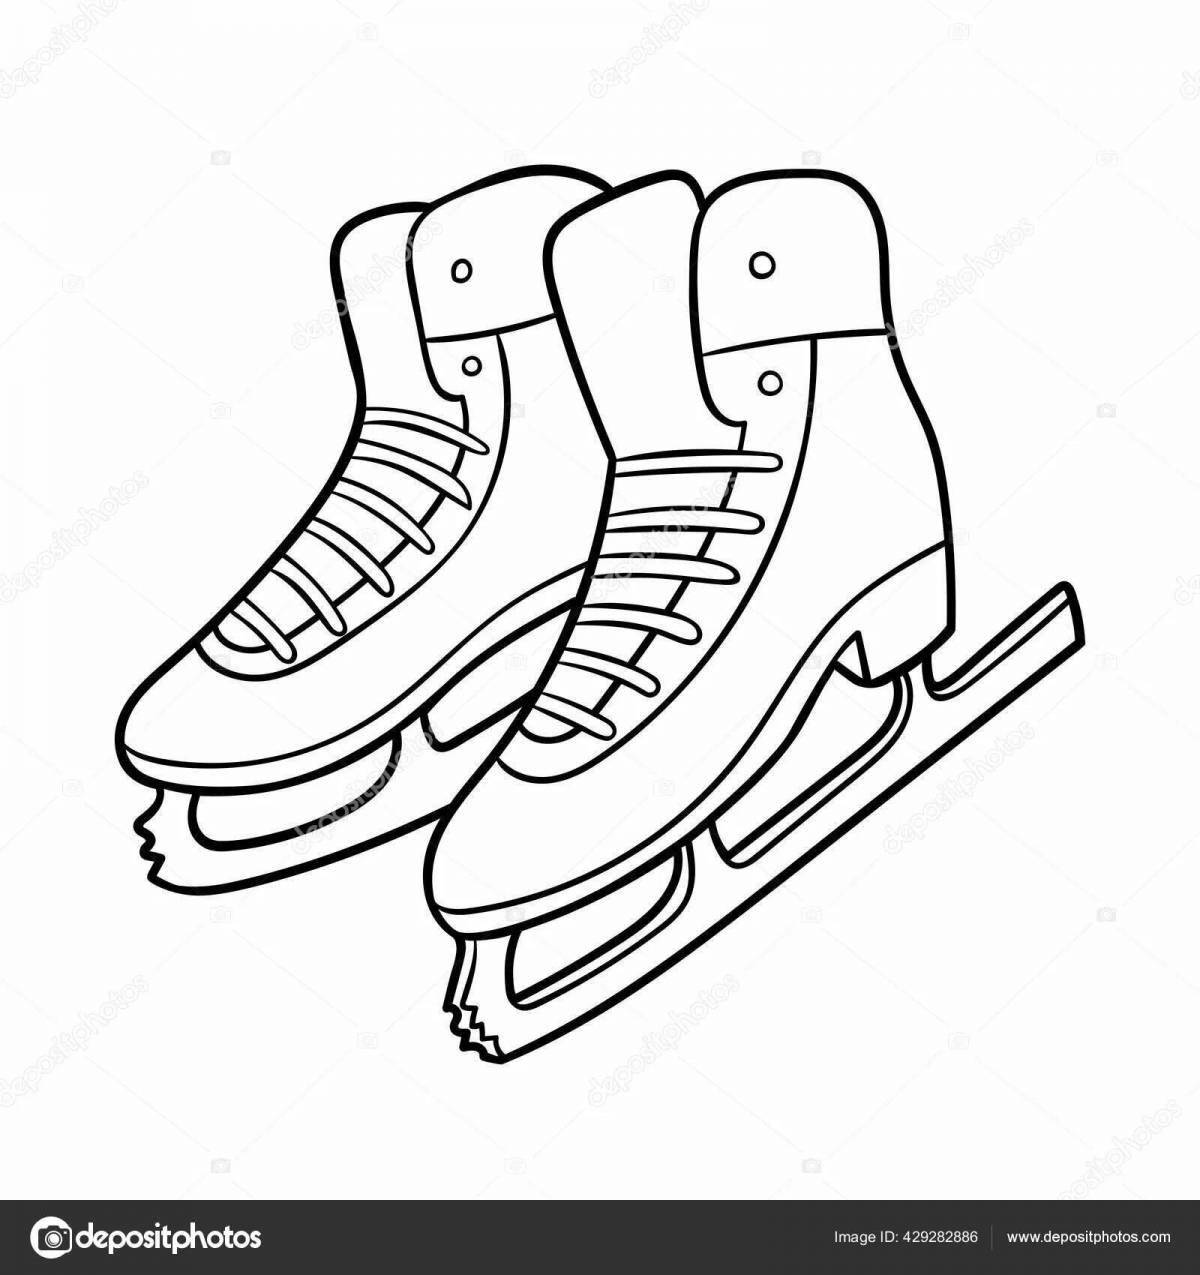 Animated coloring pages of skates for children 5-6 years old